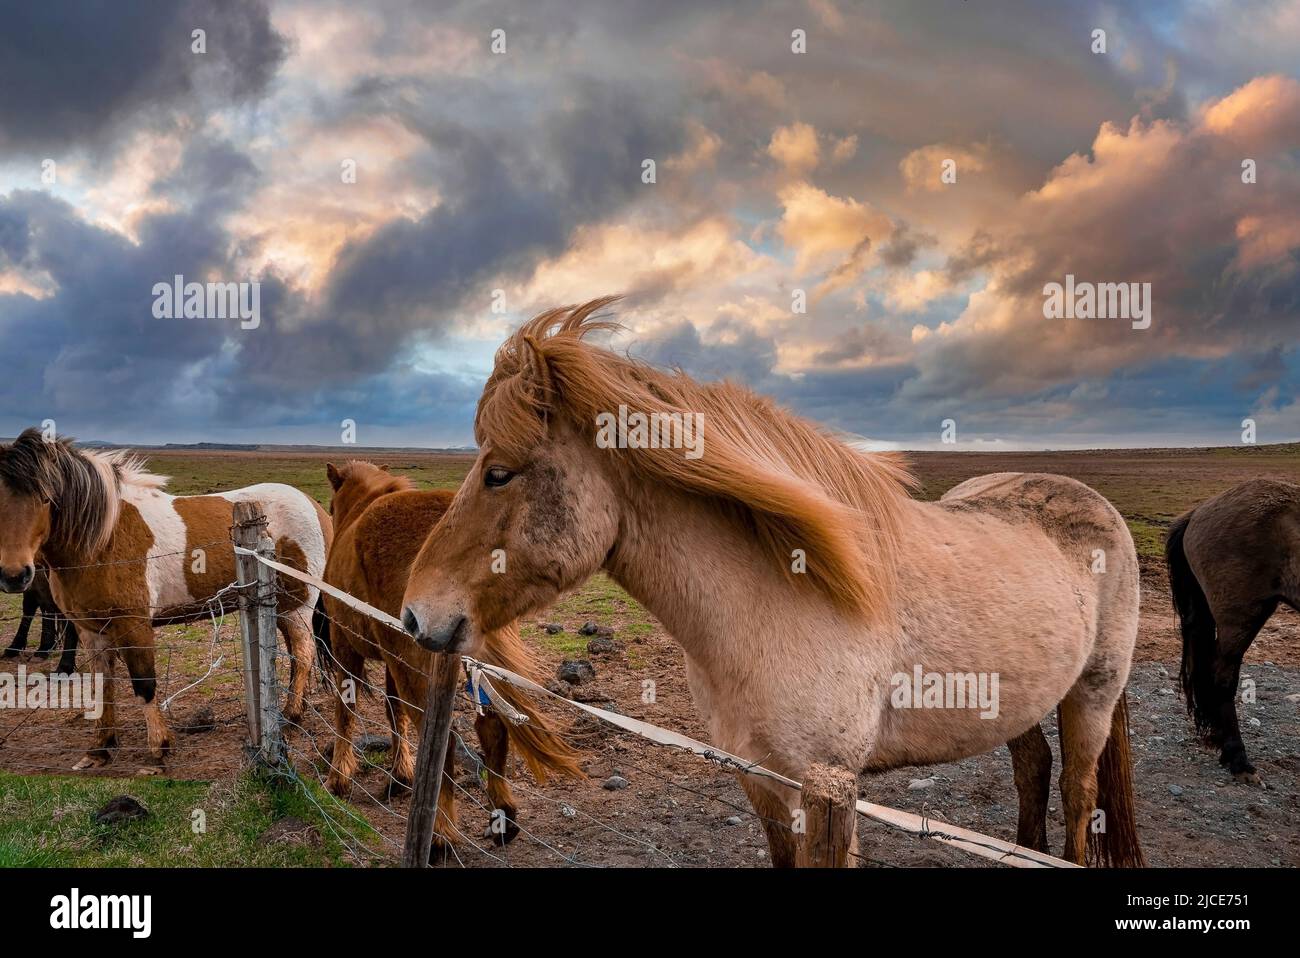 Icelandic horses standing near fence on field against cloudy sky during sunset Stock Photo